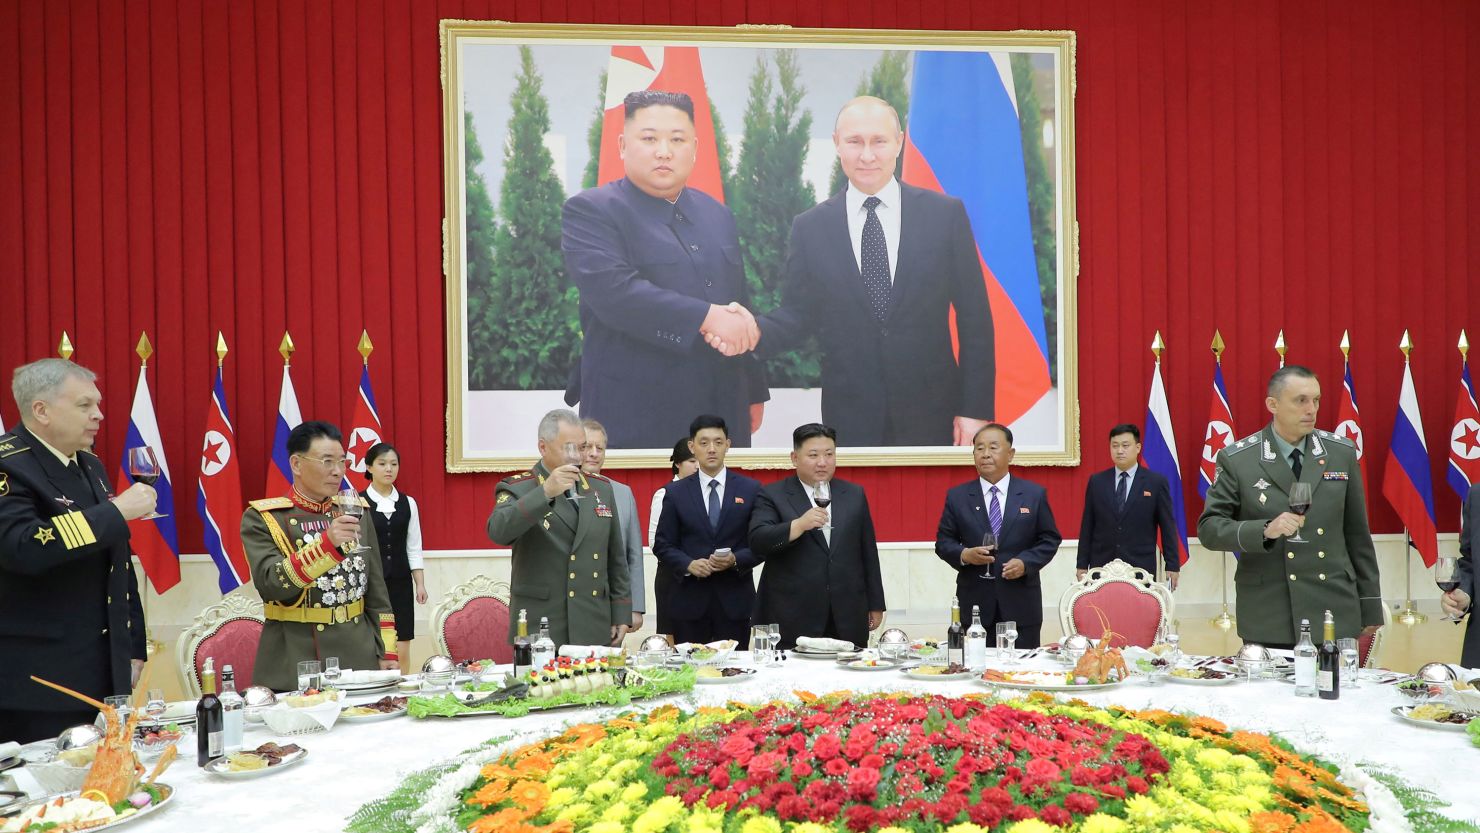 Defense Minister Sergei Shoigu attends a reception for the Russian military delegation hosted by North Korean leader Kim Jong Un.